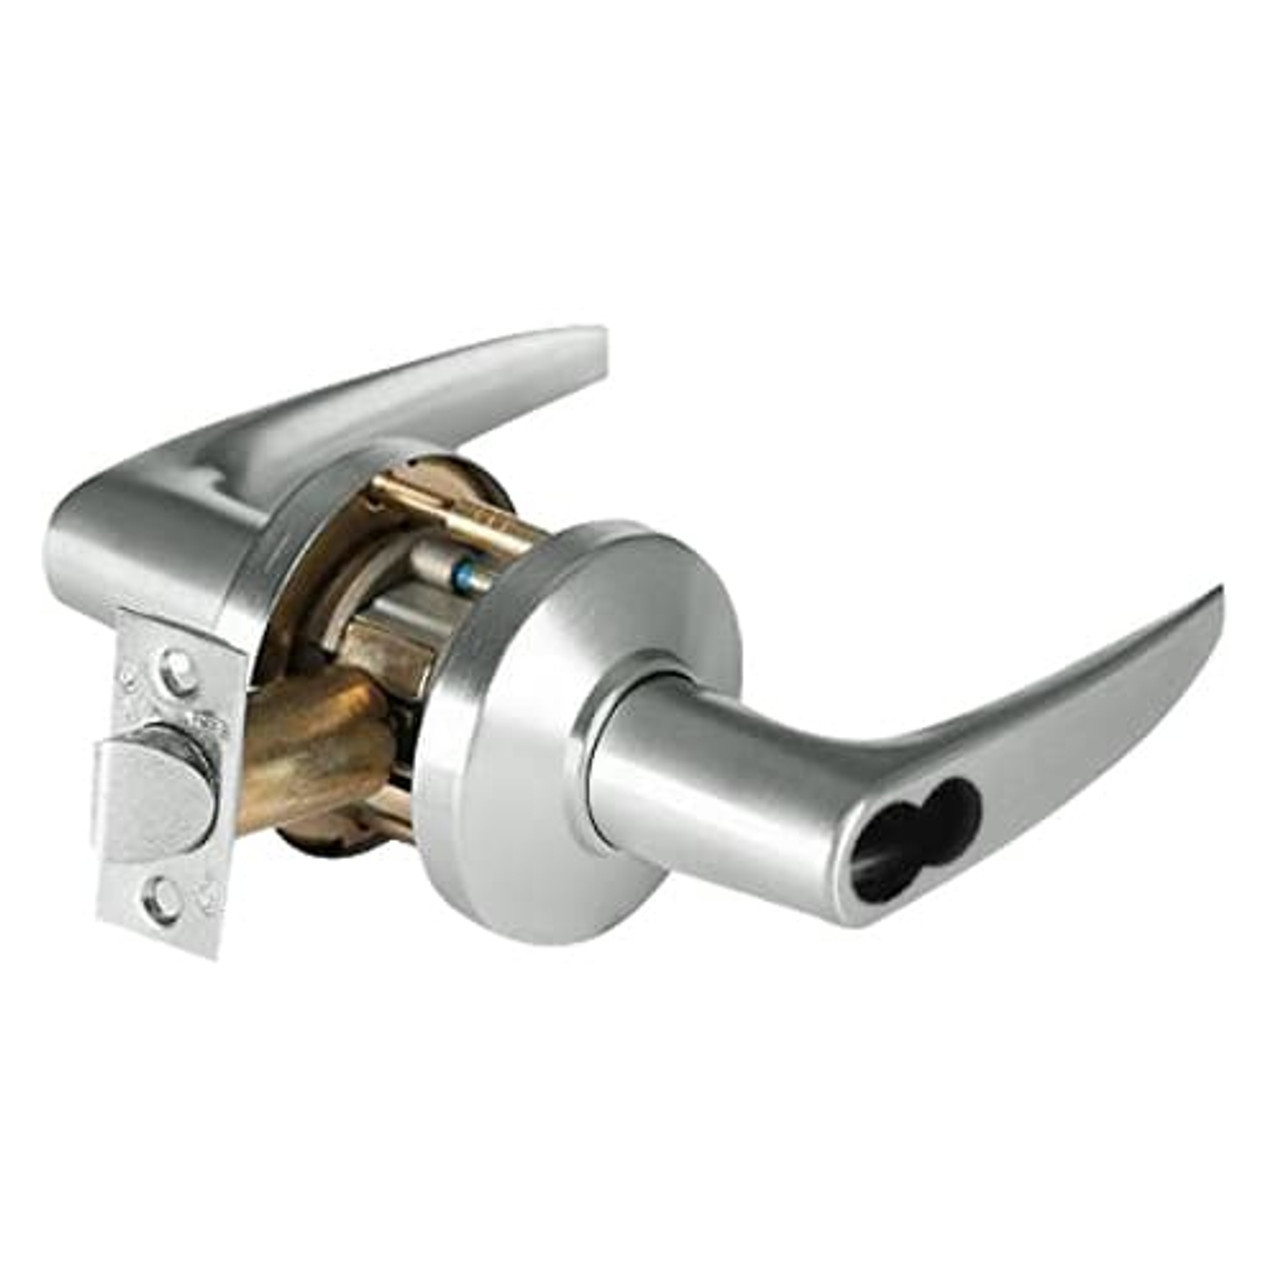 9K37W16CSTK618LM Best 9K Series Institutional Cylindrical Lever Locks with Curved without Return Lever Design Accept 7 Pin Best Core in Bright Nickel